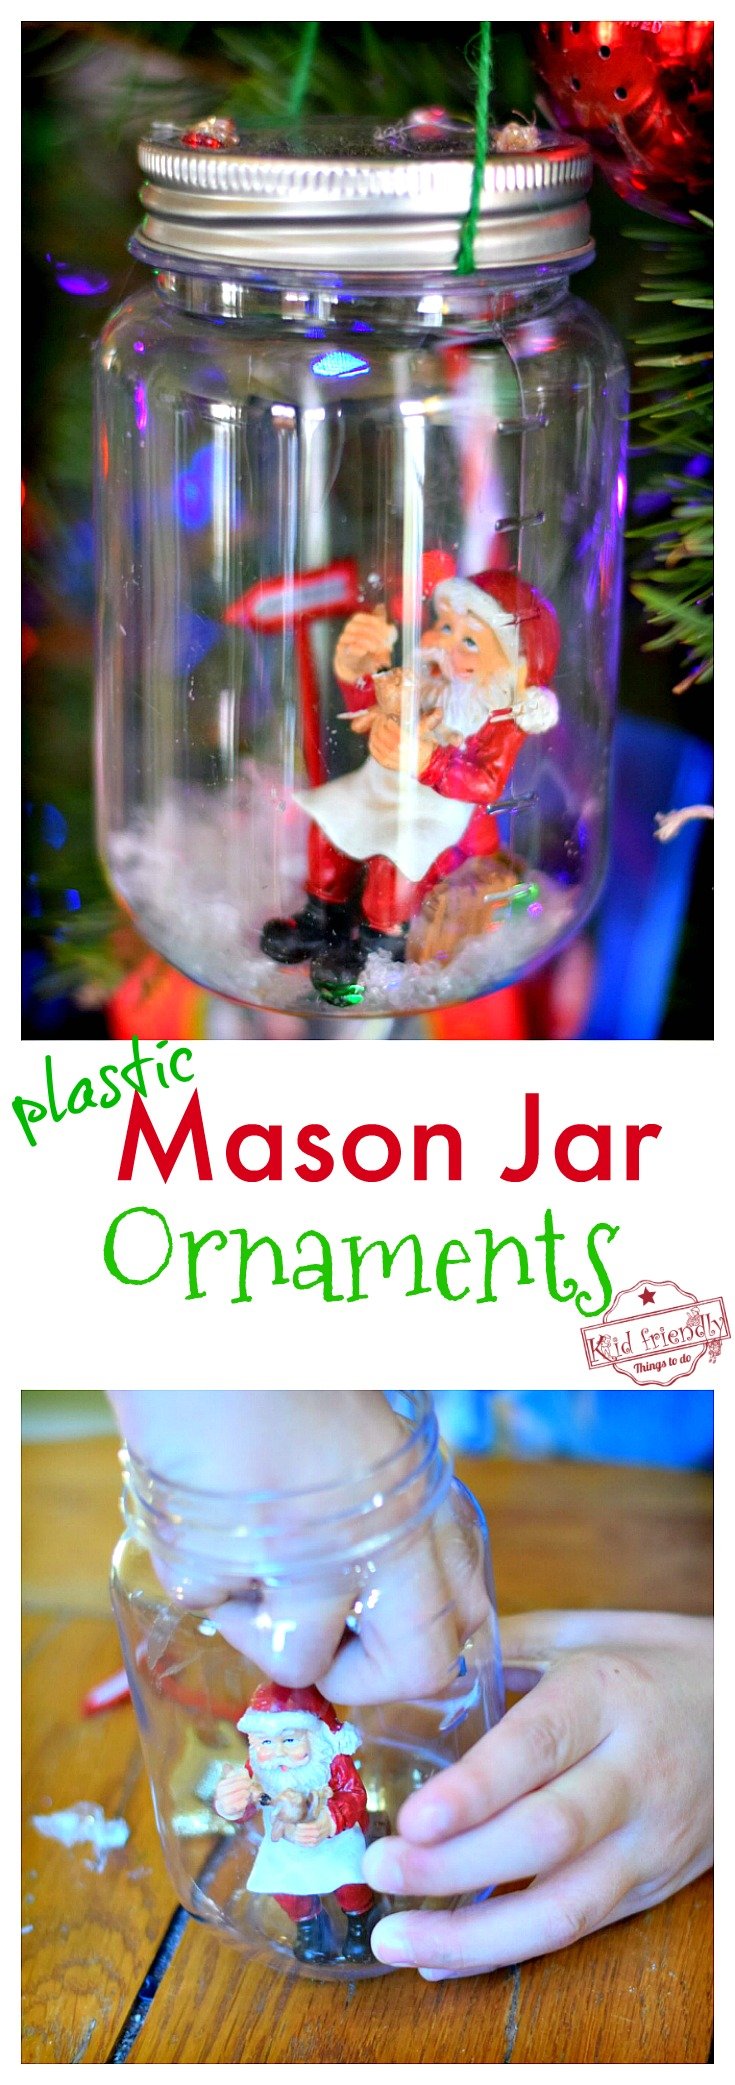 DIY Mason Jar Snow Globes for a Winter or Christmas Craft - OR - Christmas Ornament - Perfect for Christmas parties with kids! So much fun. - www.kidfriendlythingstodo.com